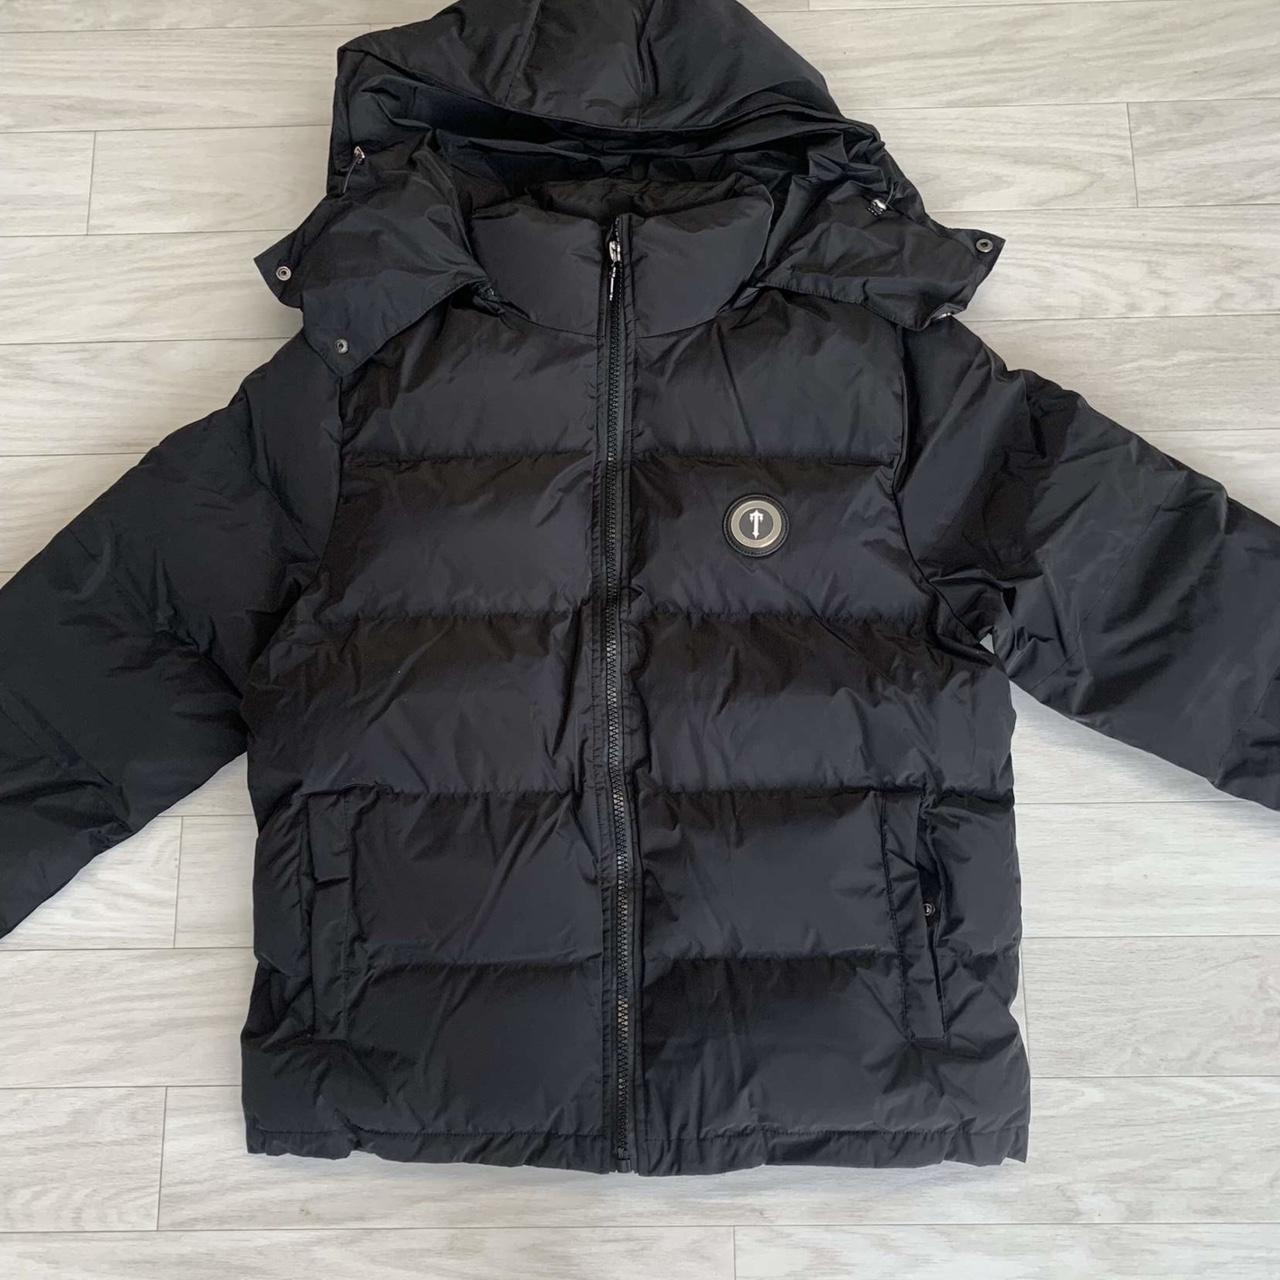 Trapstar black irongate coat Sizes small and... - Depop